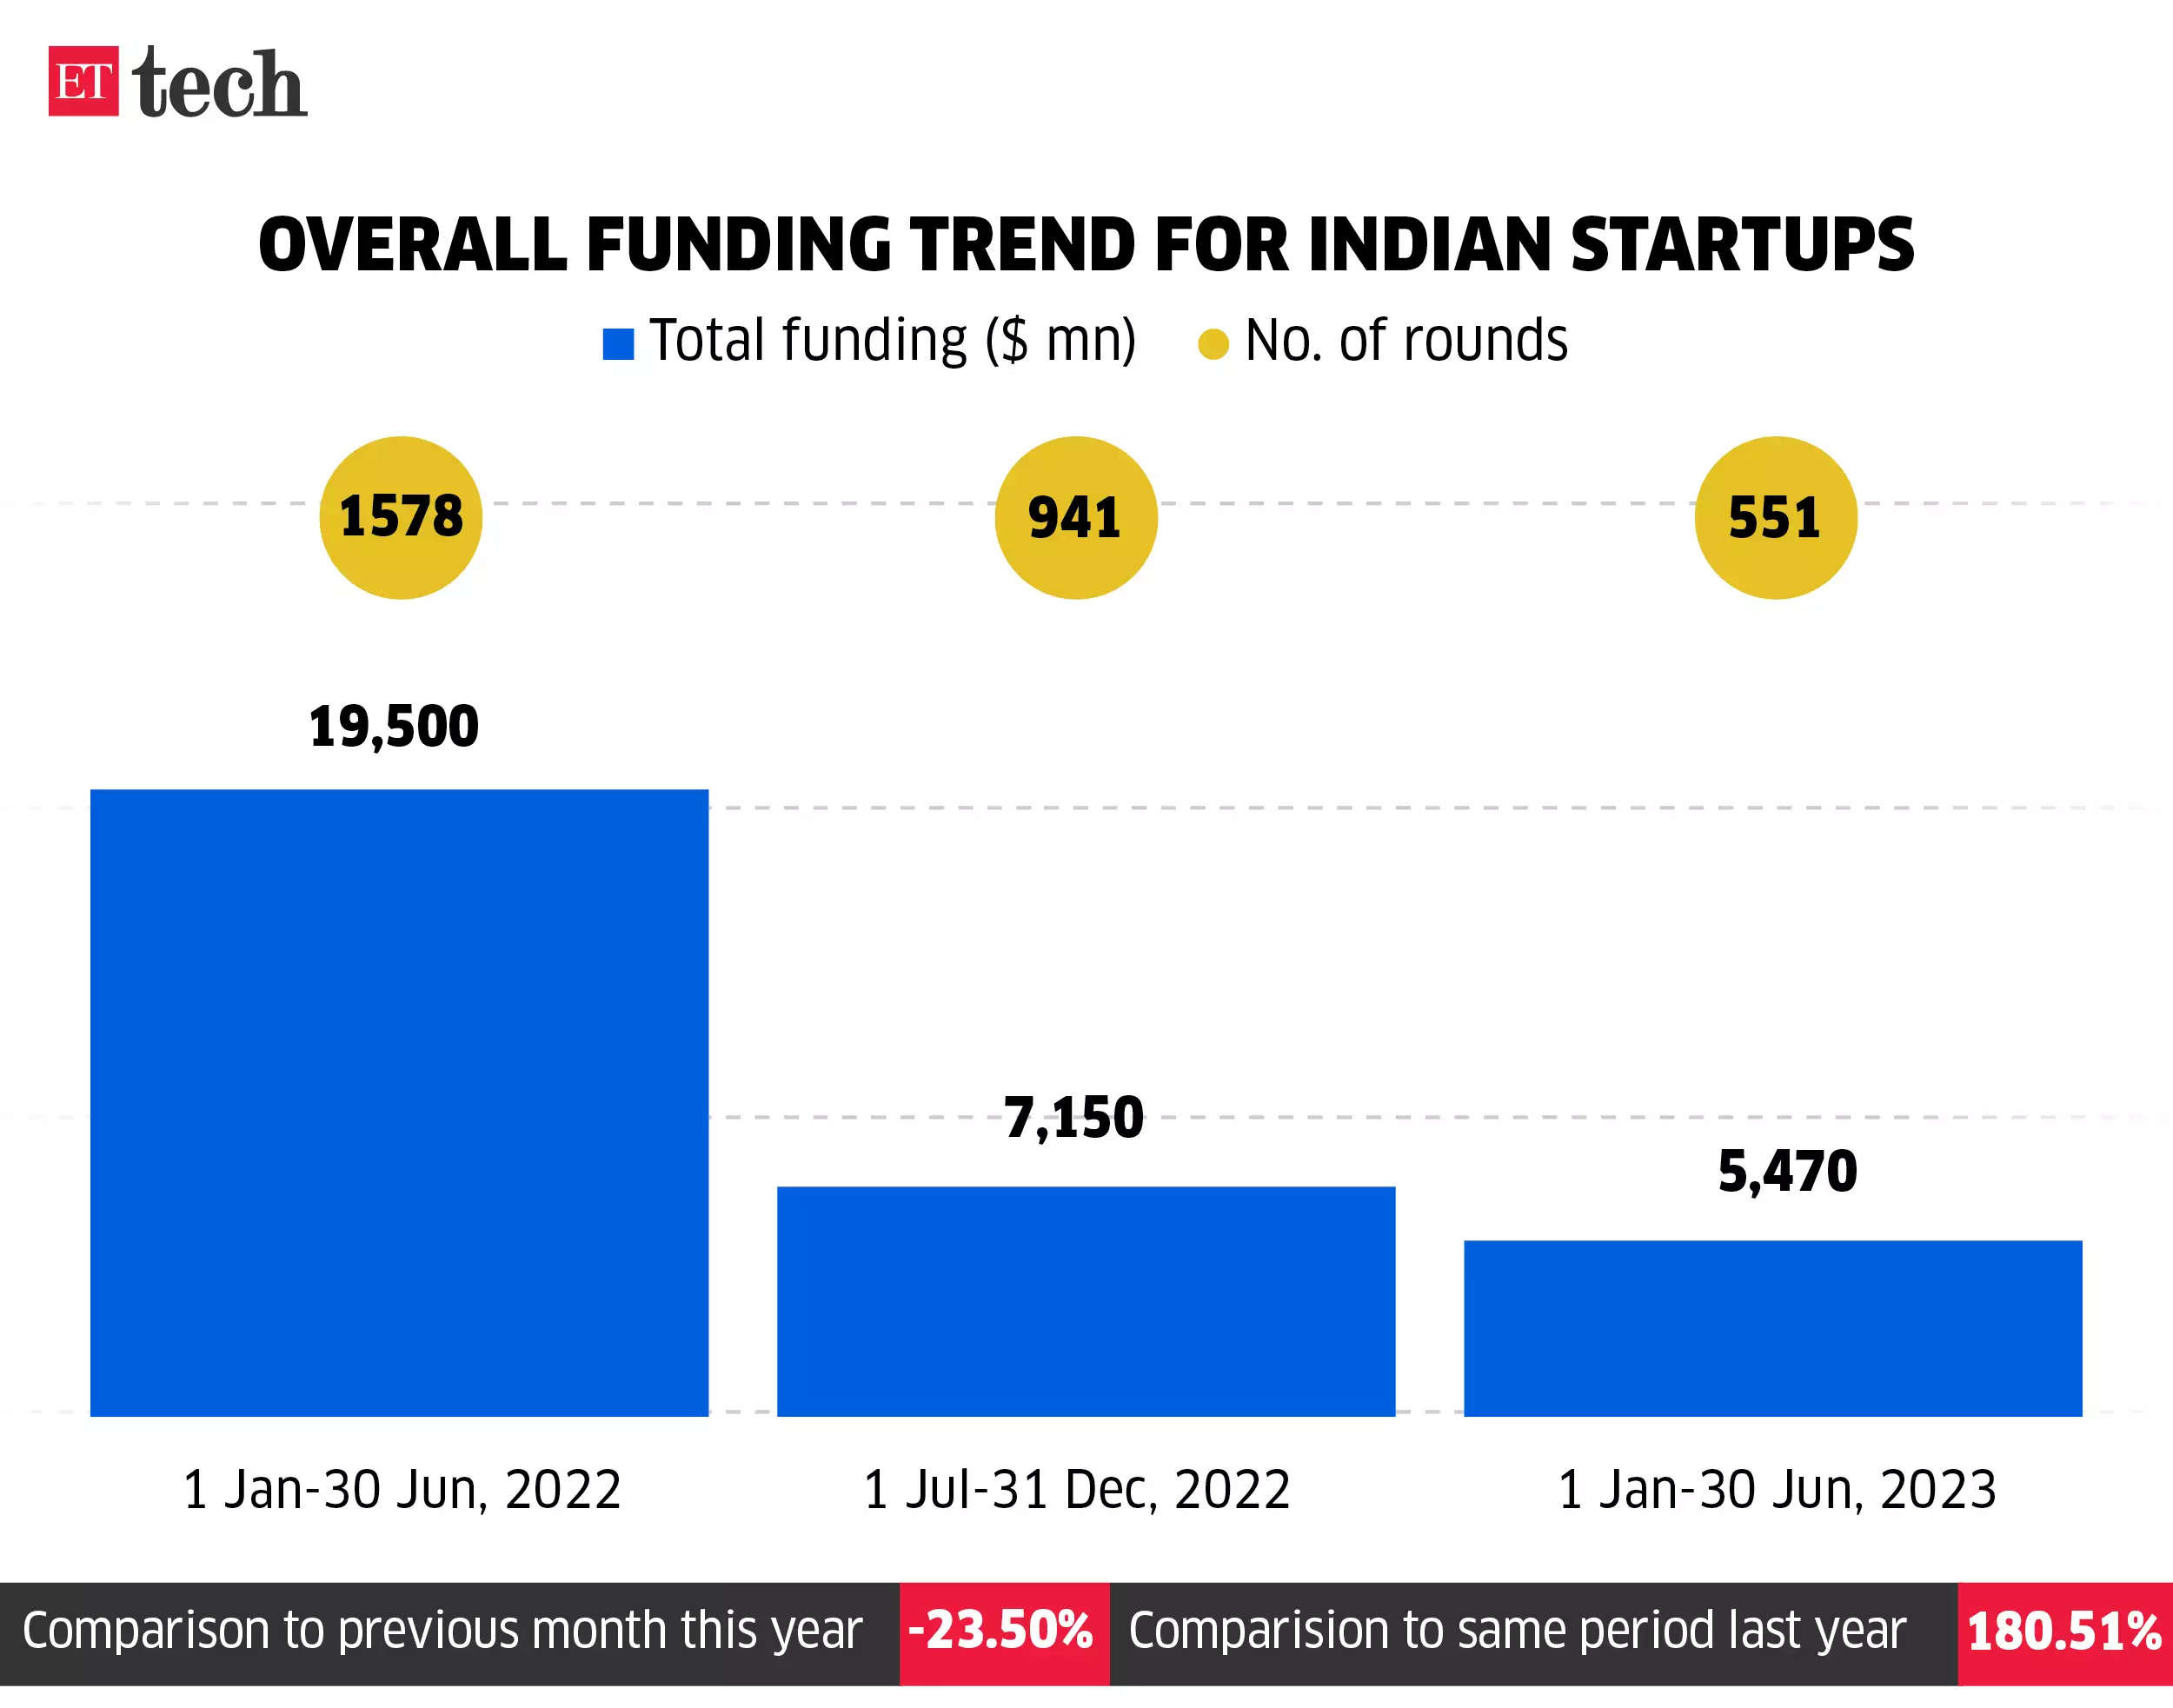 overall funding